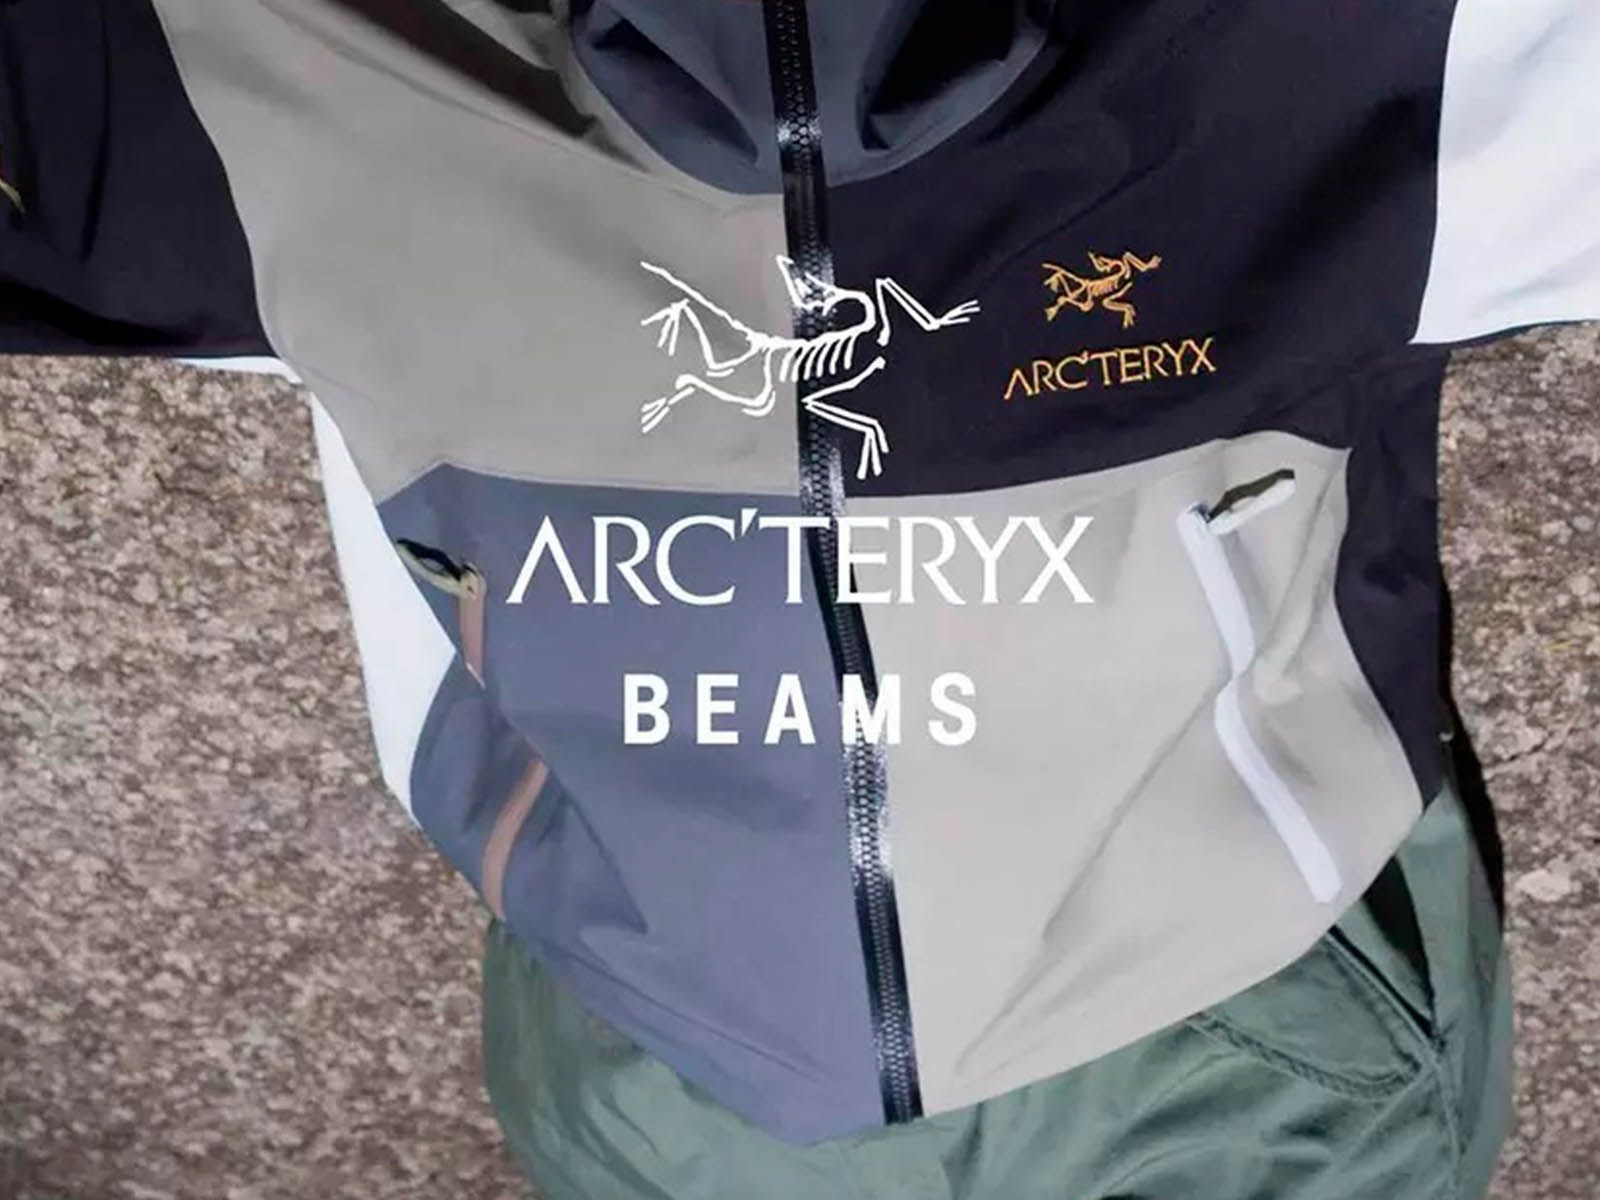 BEAMS x Arc’teryx ‘Dimensions’ to launch globally